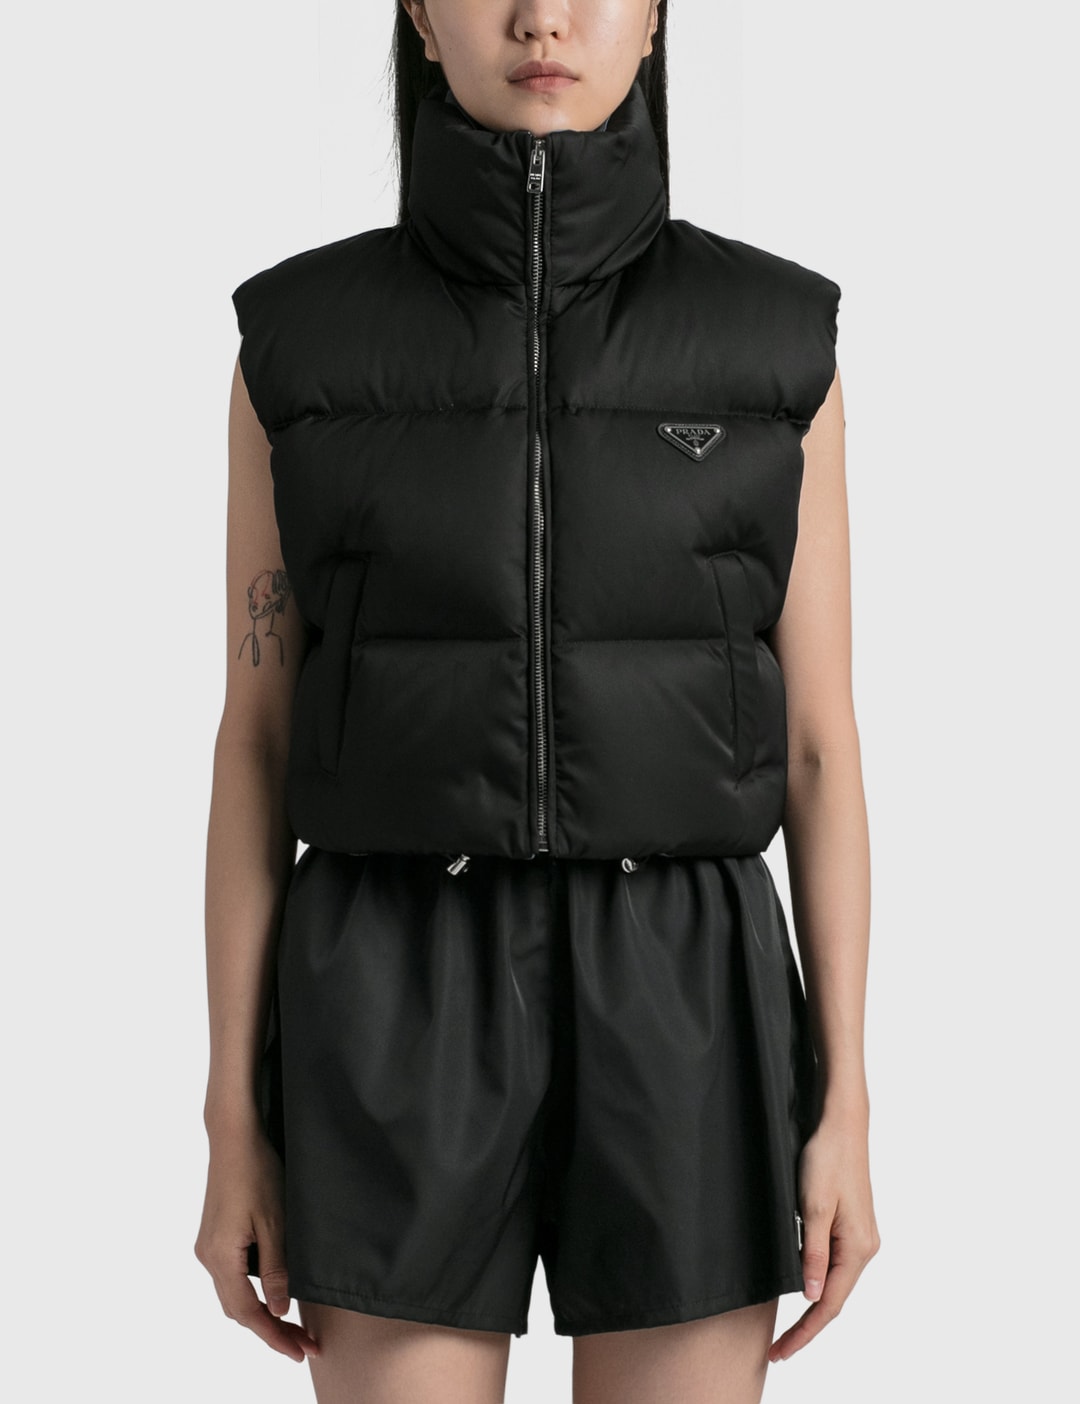 Prada - Re-Nylon Puffer Vest | HBX - Globally Curated Fashion and Lifestyle  by Hypebeast